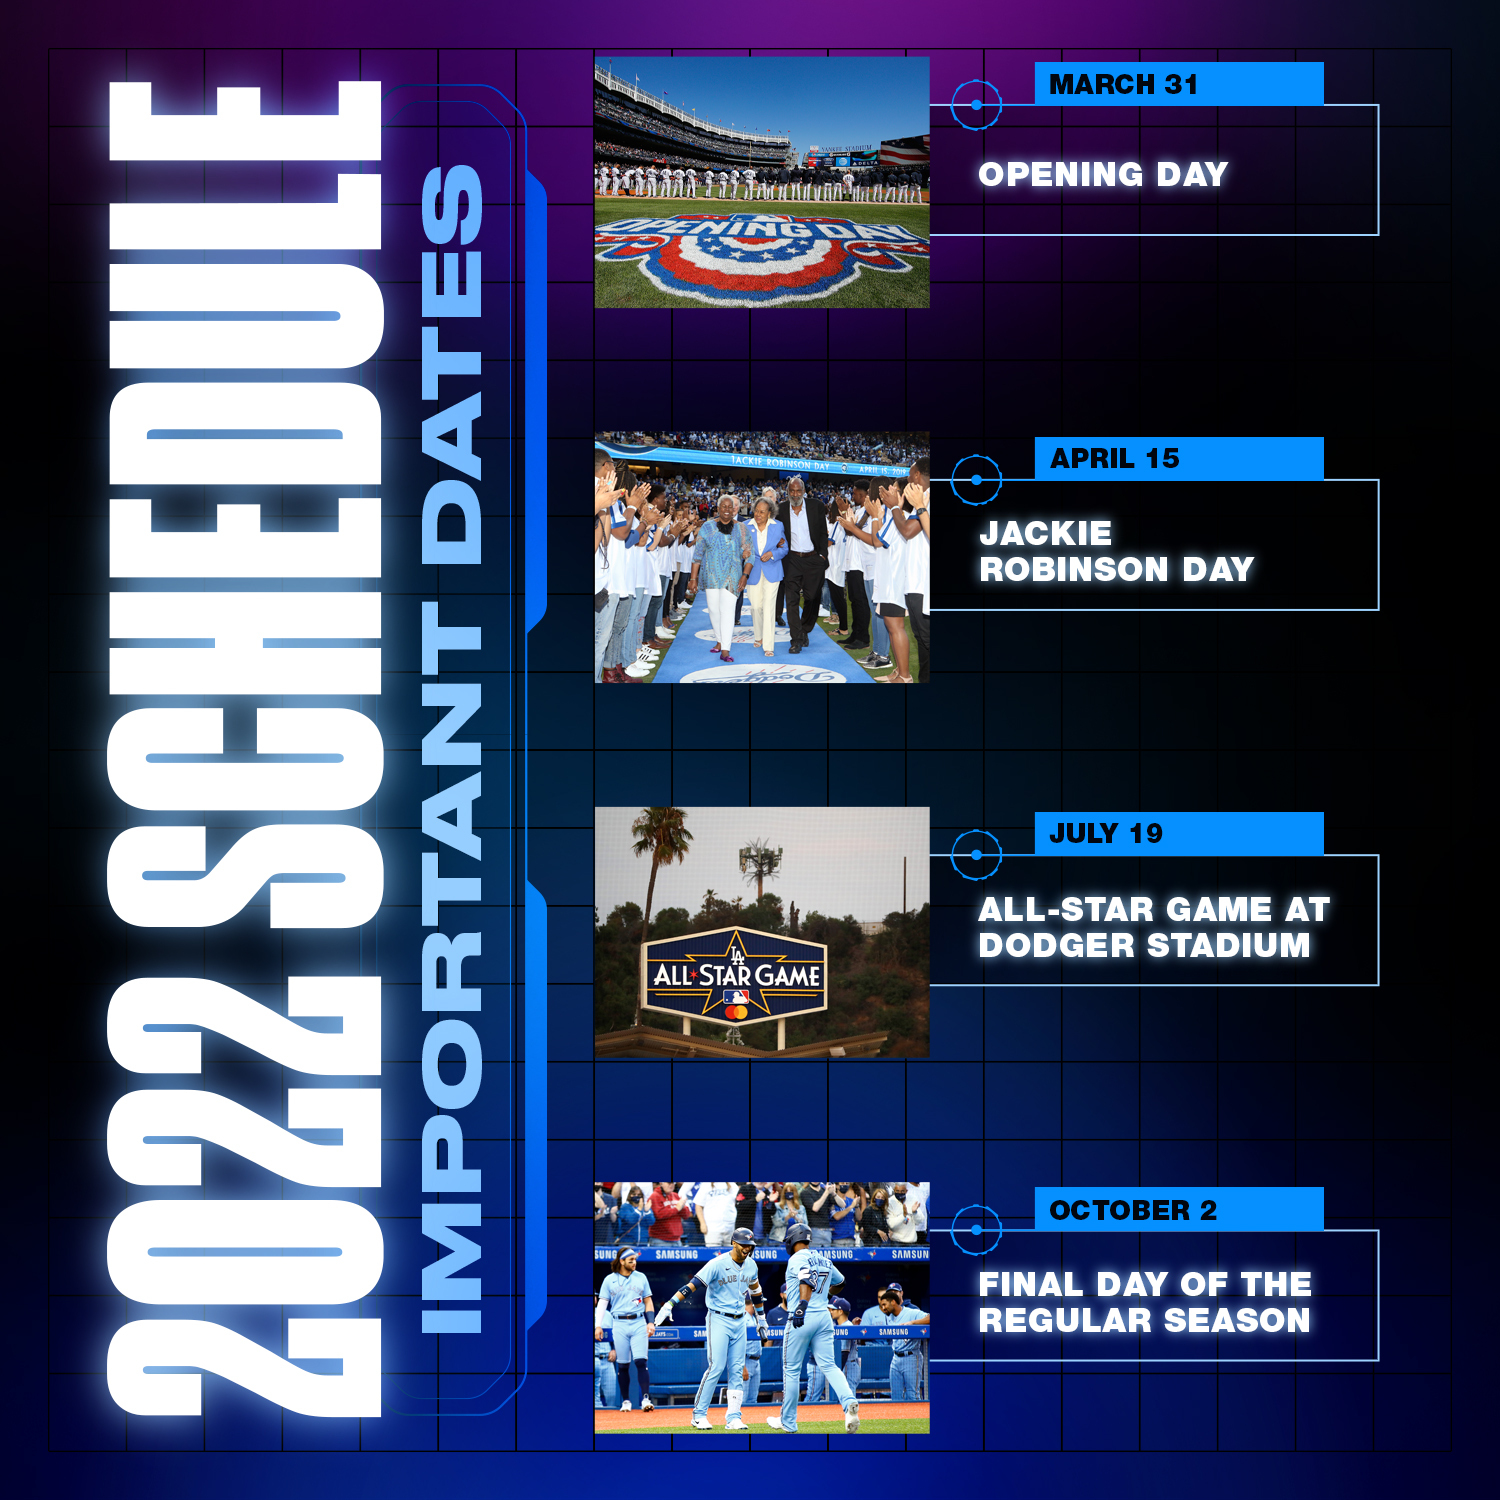 Mlb 2022 Schedule Mlb On Twitter: "The 2022 Schedule Is Out! Mark Your Calendar Accordingly.  ⬇️ Https://T.co/By19Zgwwbu" / Twitter